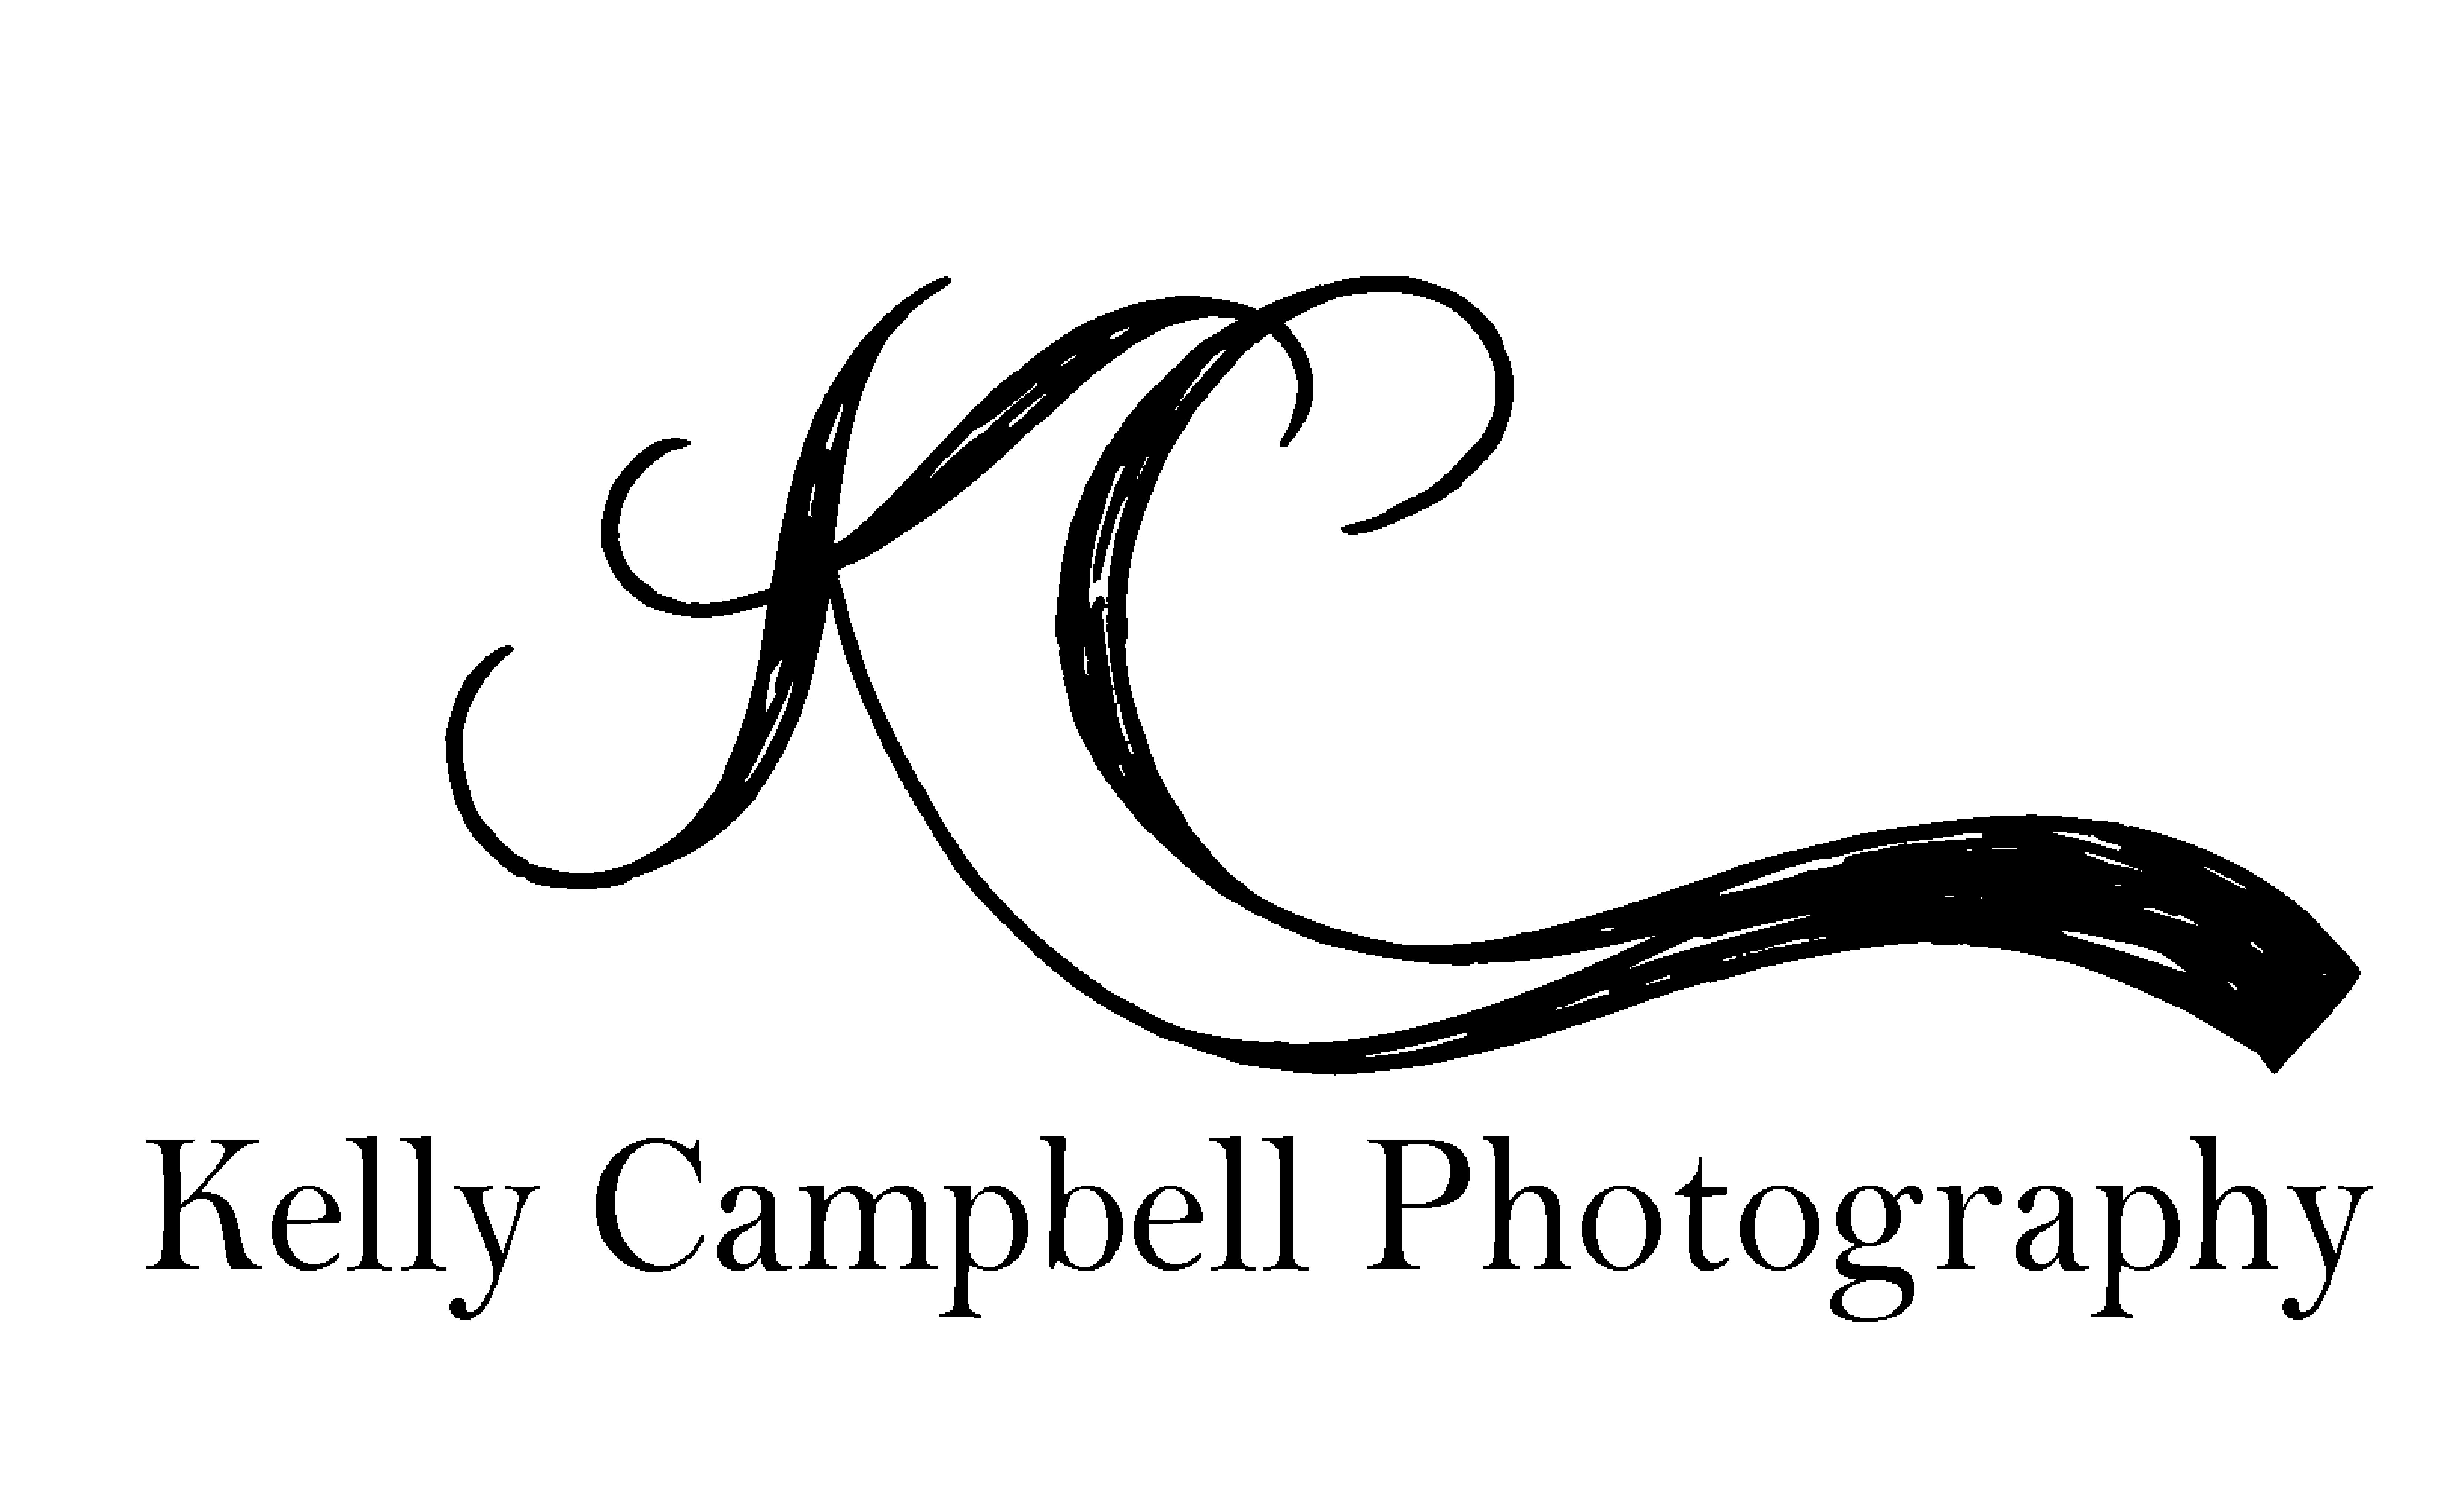 Kelly Campbell Photography